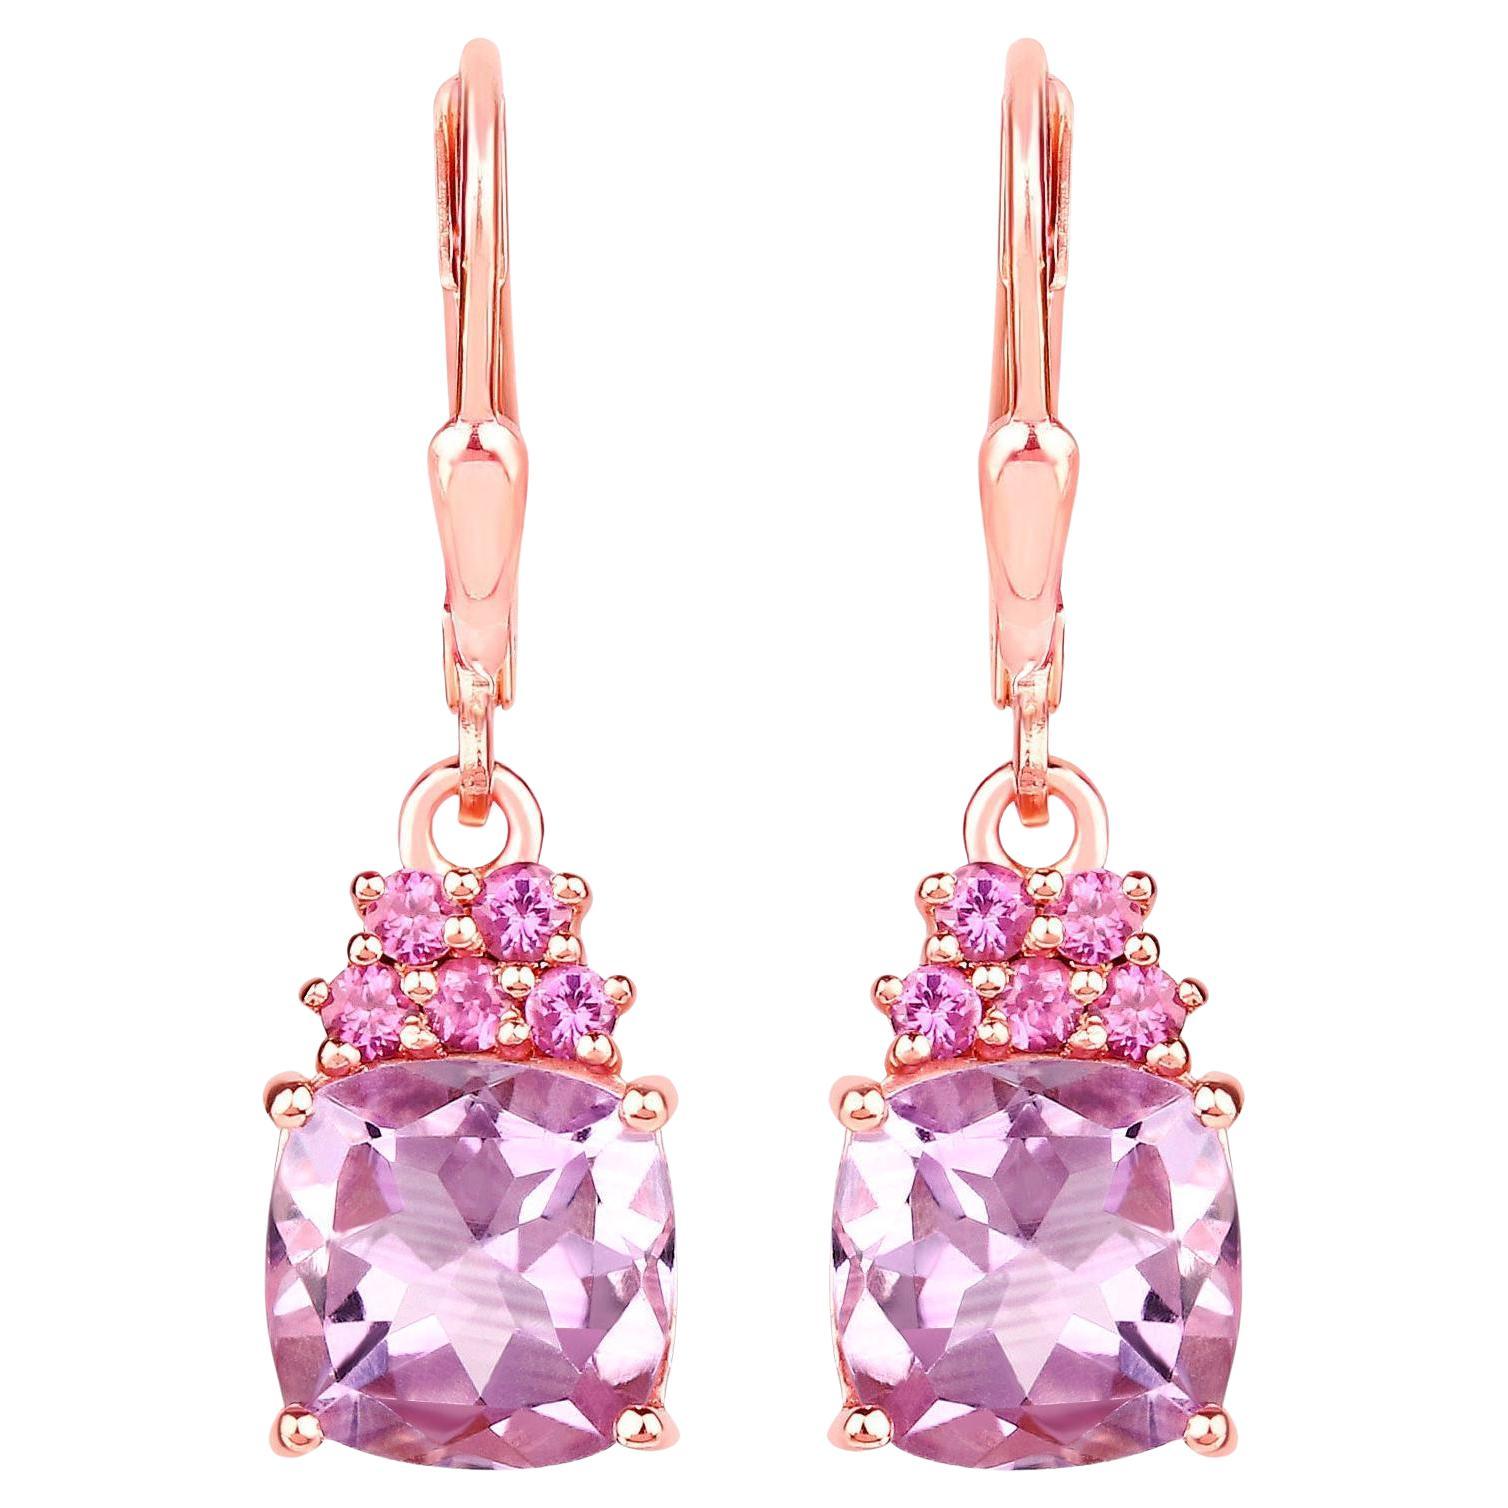 It comes with the Gemological Appraisal by GIA GG/AJP
All Gemstones are Natural
2 Pink Amethysts = 4.40 Carats
10 Rhodolite Garnets = 0.50 Carats
Metal: 18K Rose Gold Plated Sterling Silver
Dimensions: 28 x 8 mm